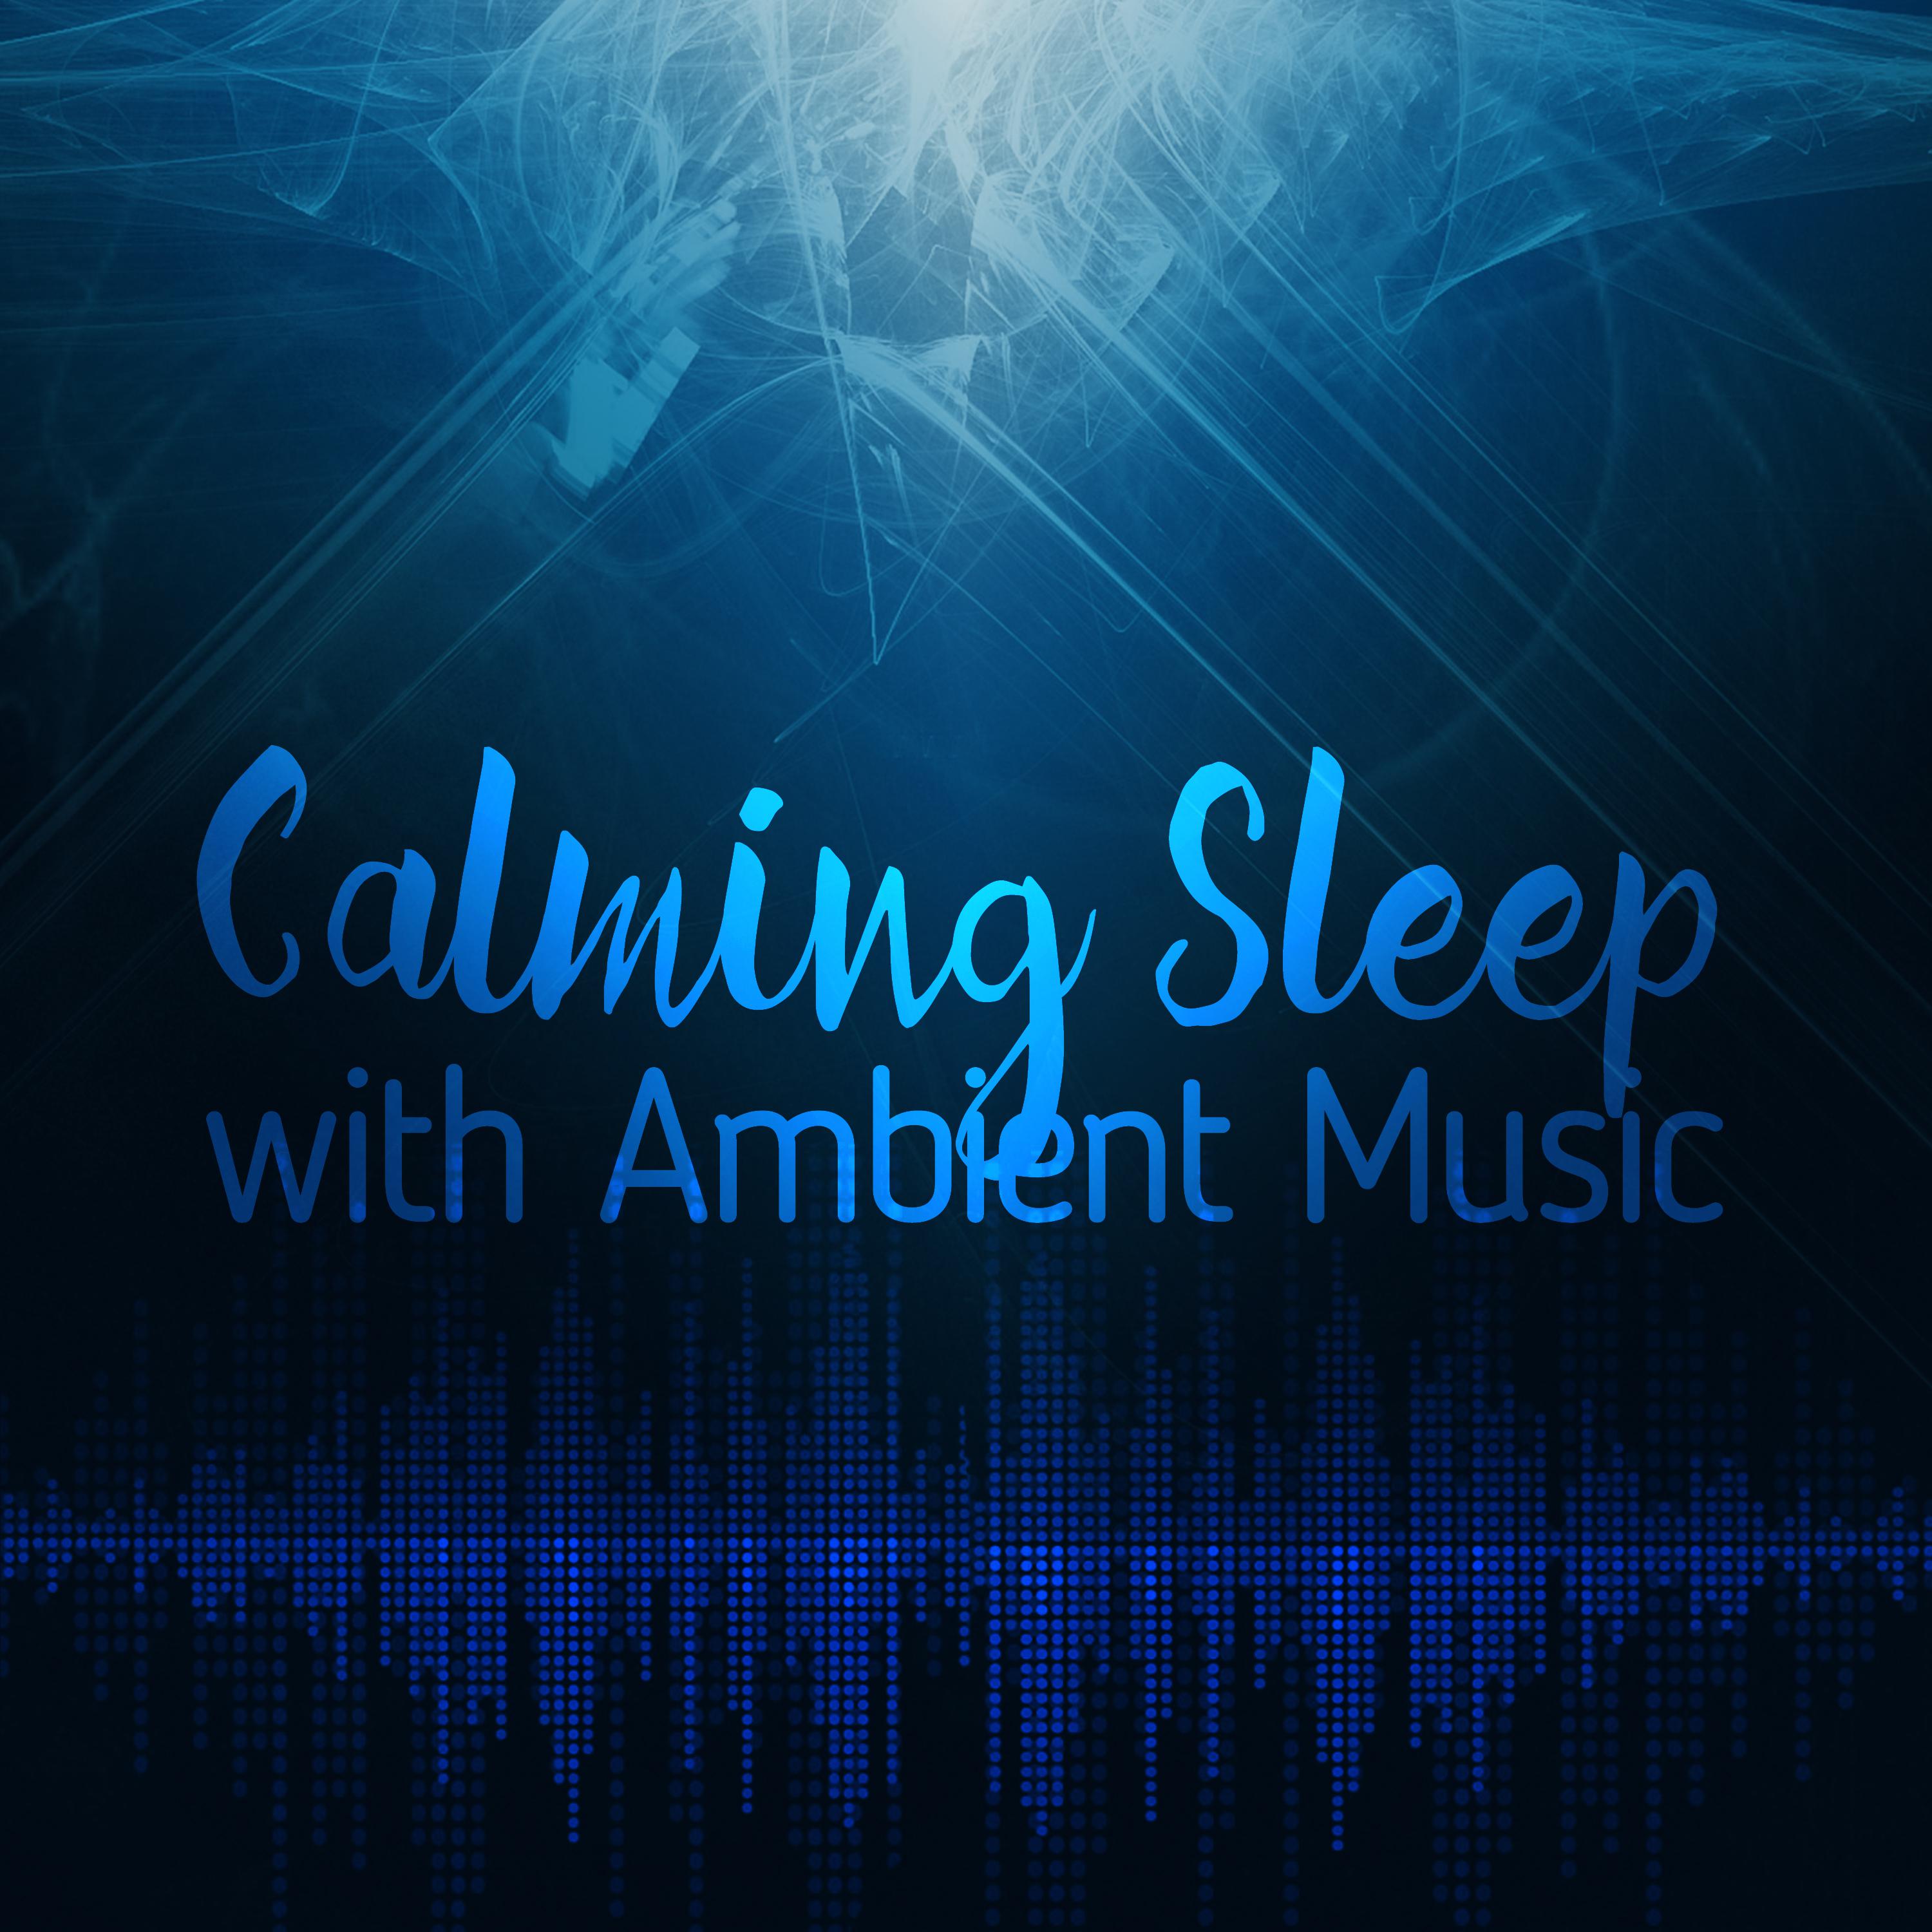 Calming Sleep with Ambient Music